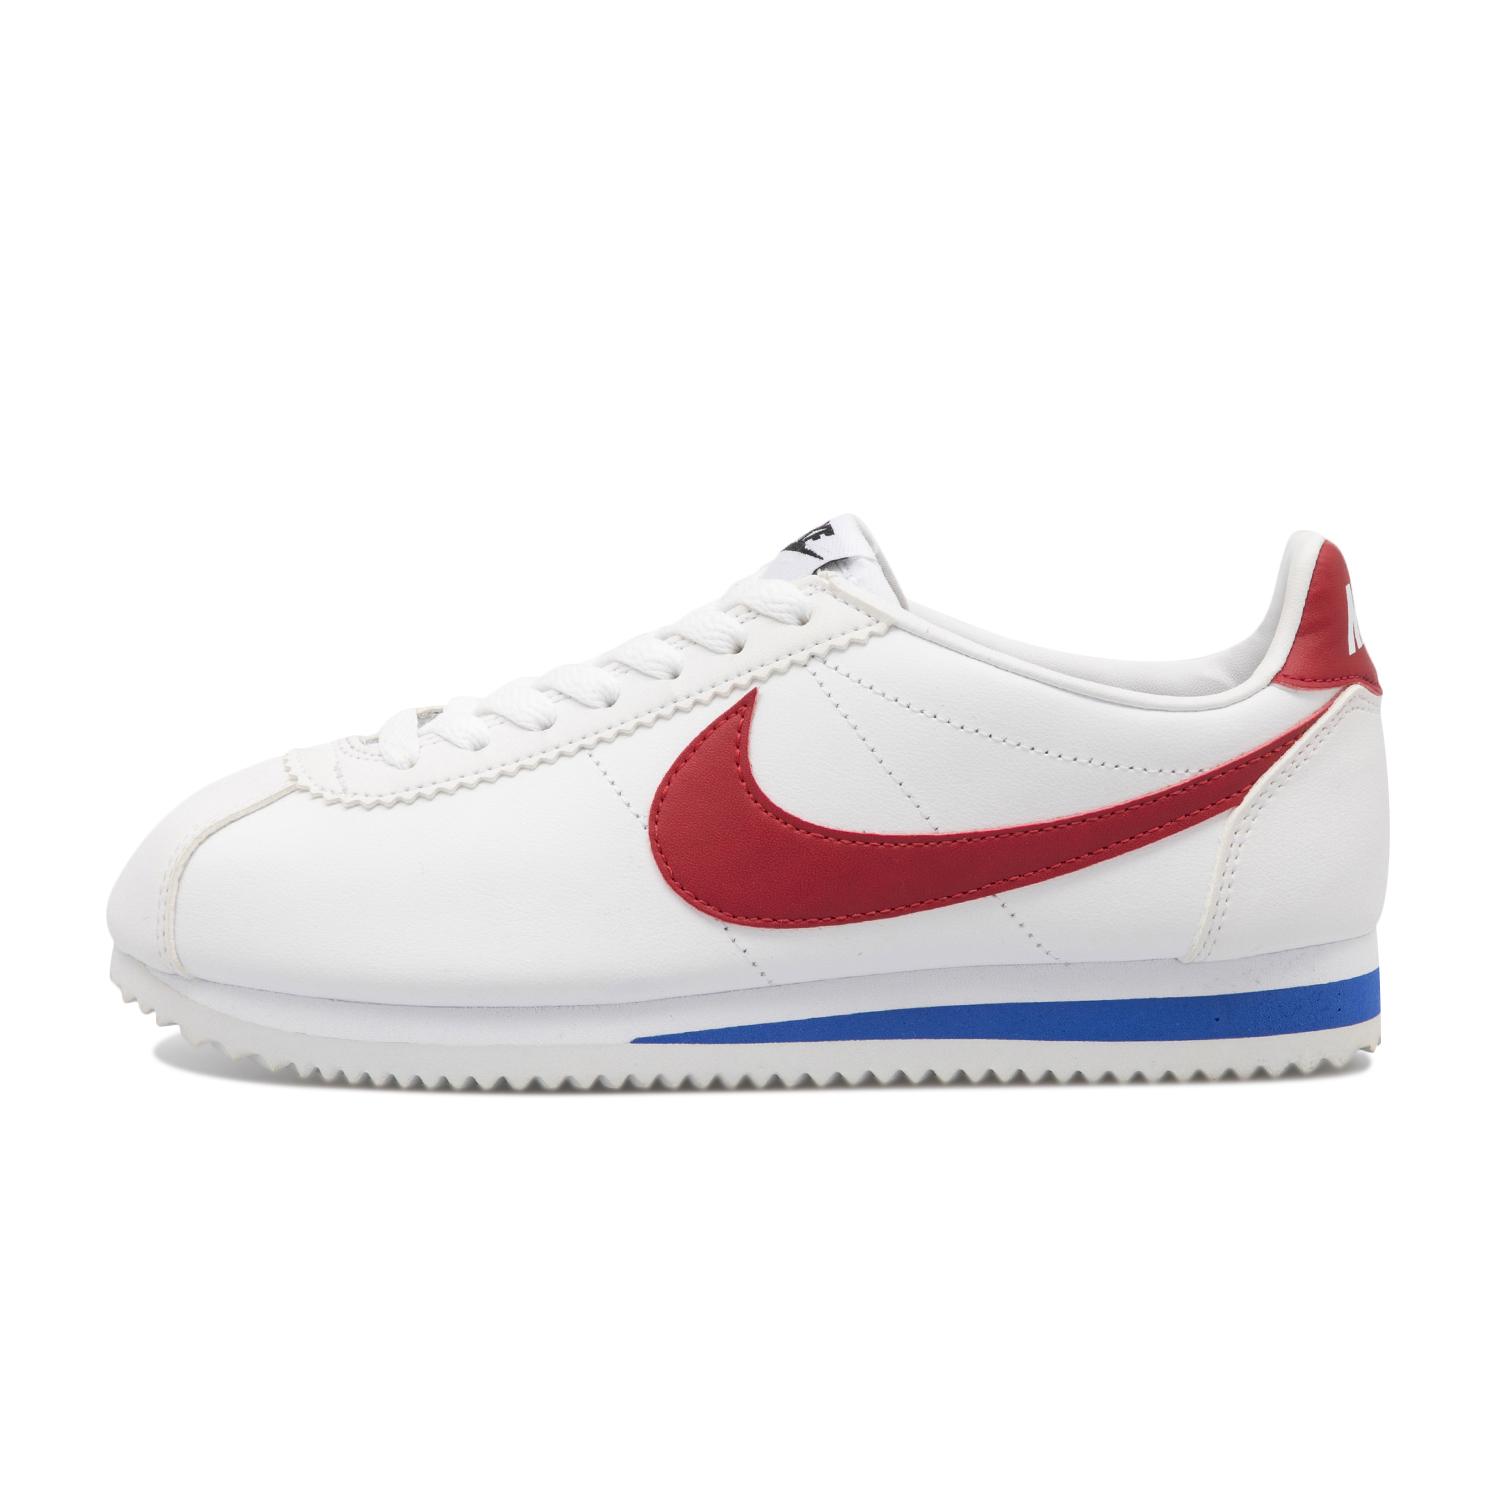 【NIKE】 ナイキ W CLASSIC CORTEZ LEATHER クラシック コルテッツ レザー W807471 103WT/VRED